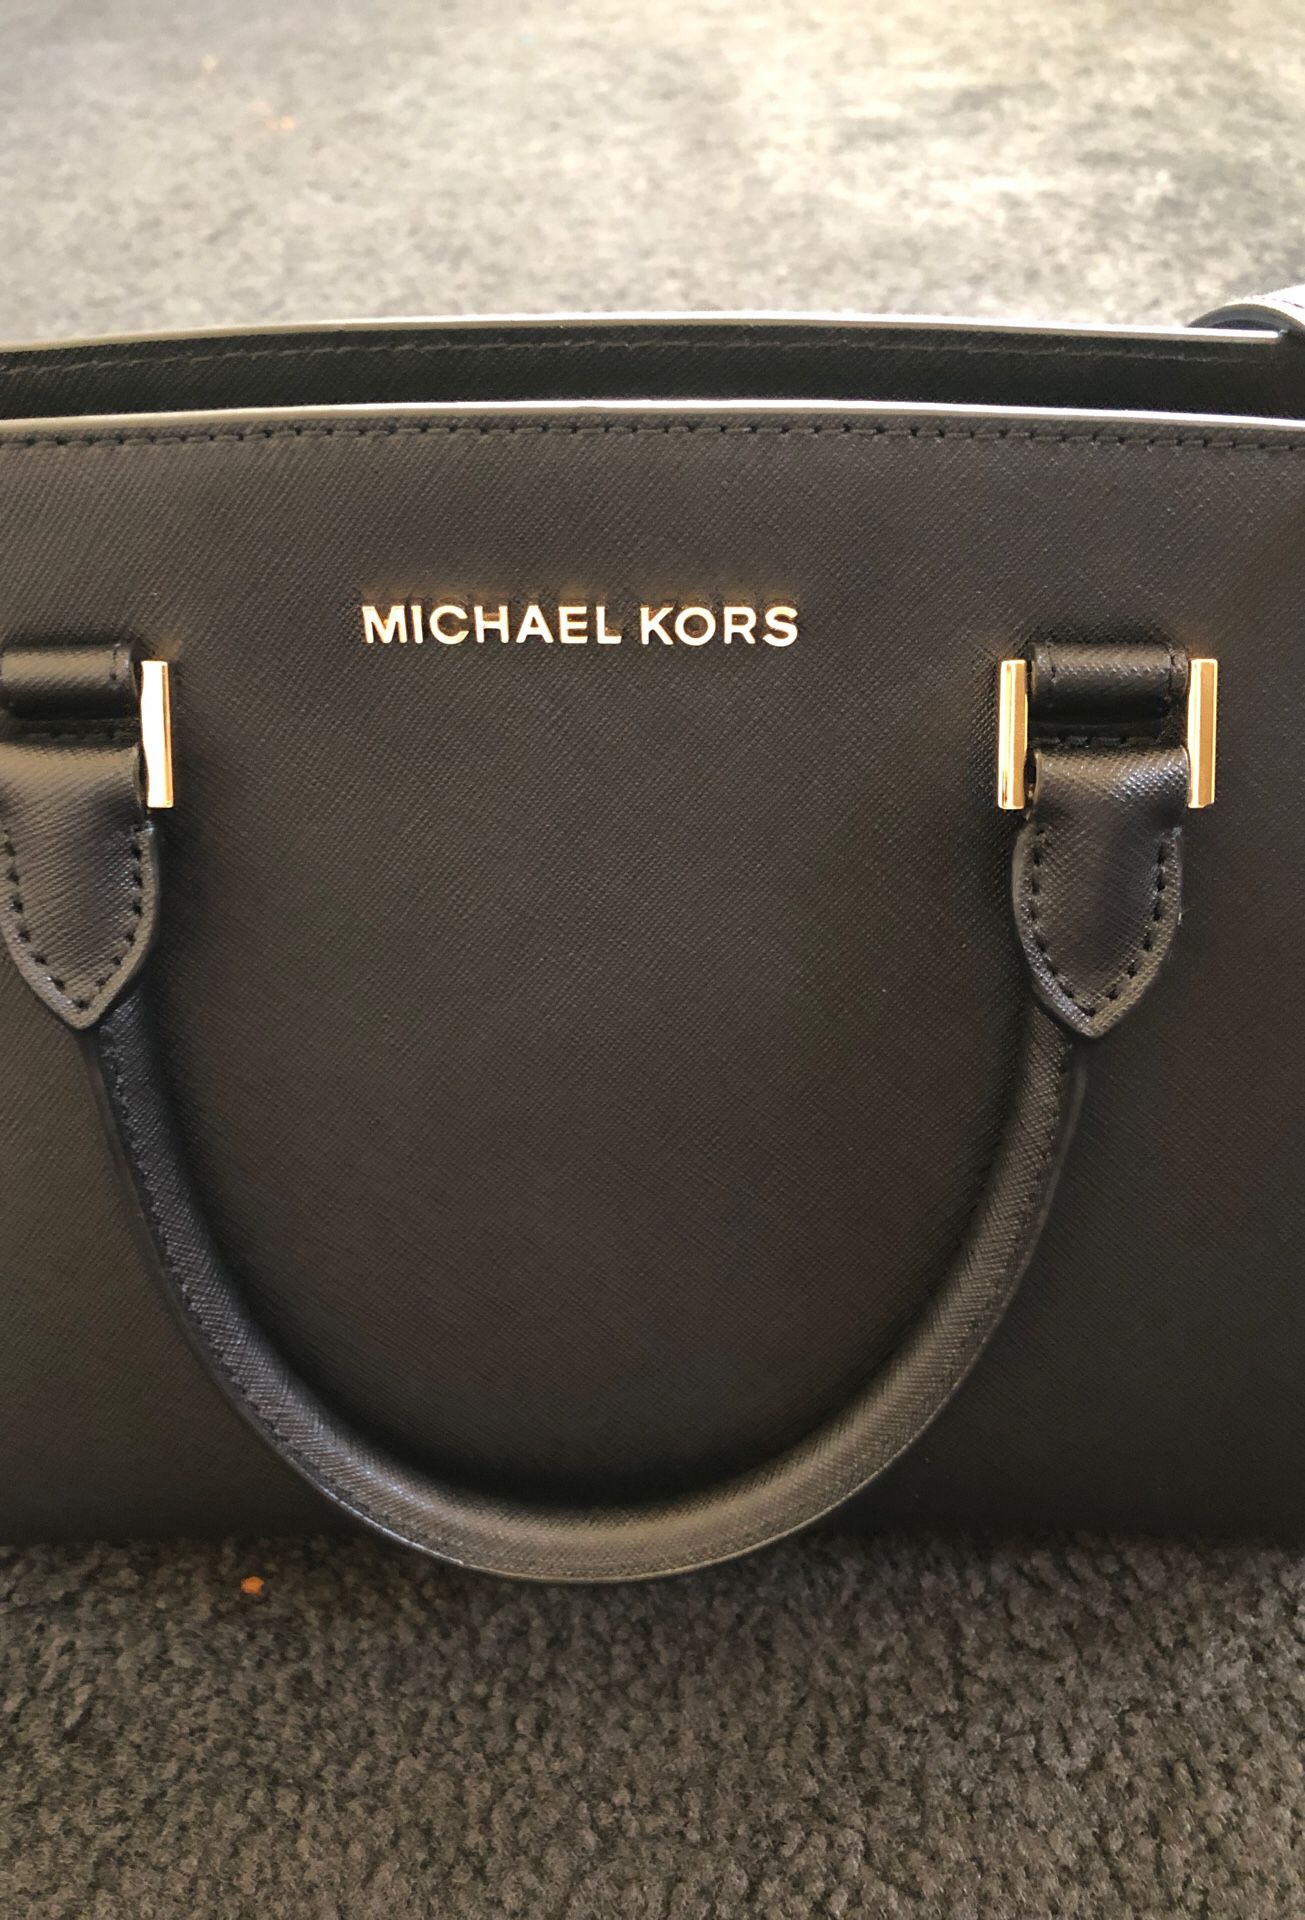 Michael Kors authentic purse and matching wallet